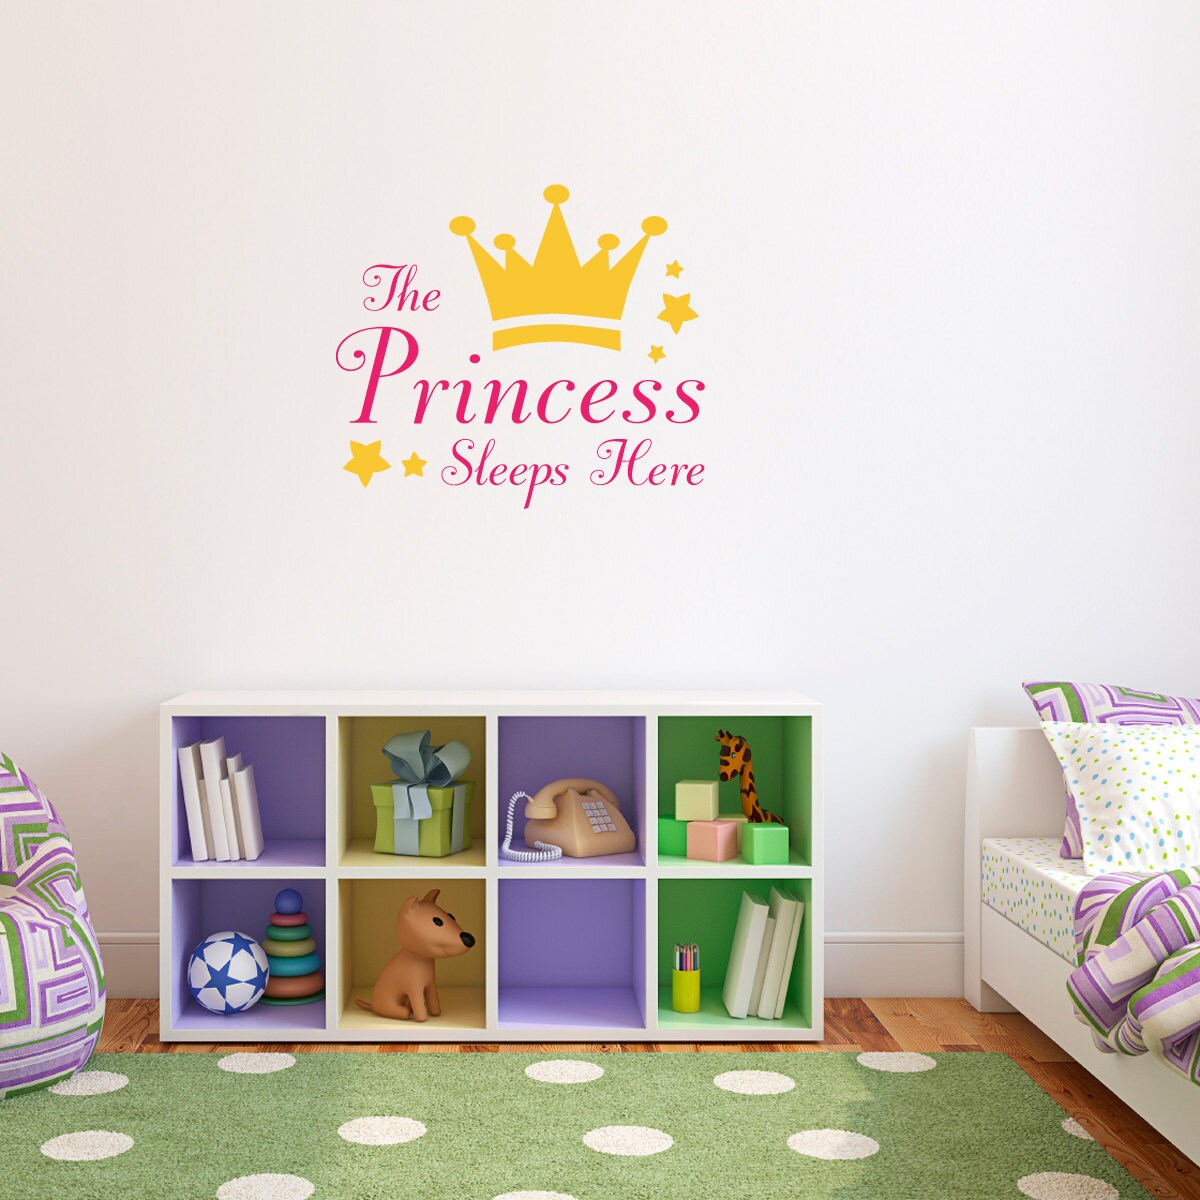 Decal Mural Baby Girl Wall Sticker Pink Crown & Quote The Princess sleeps here 